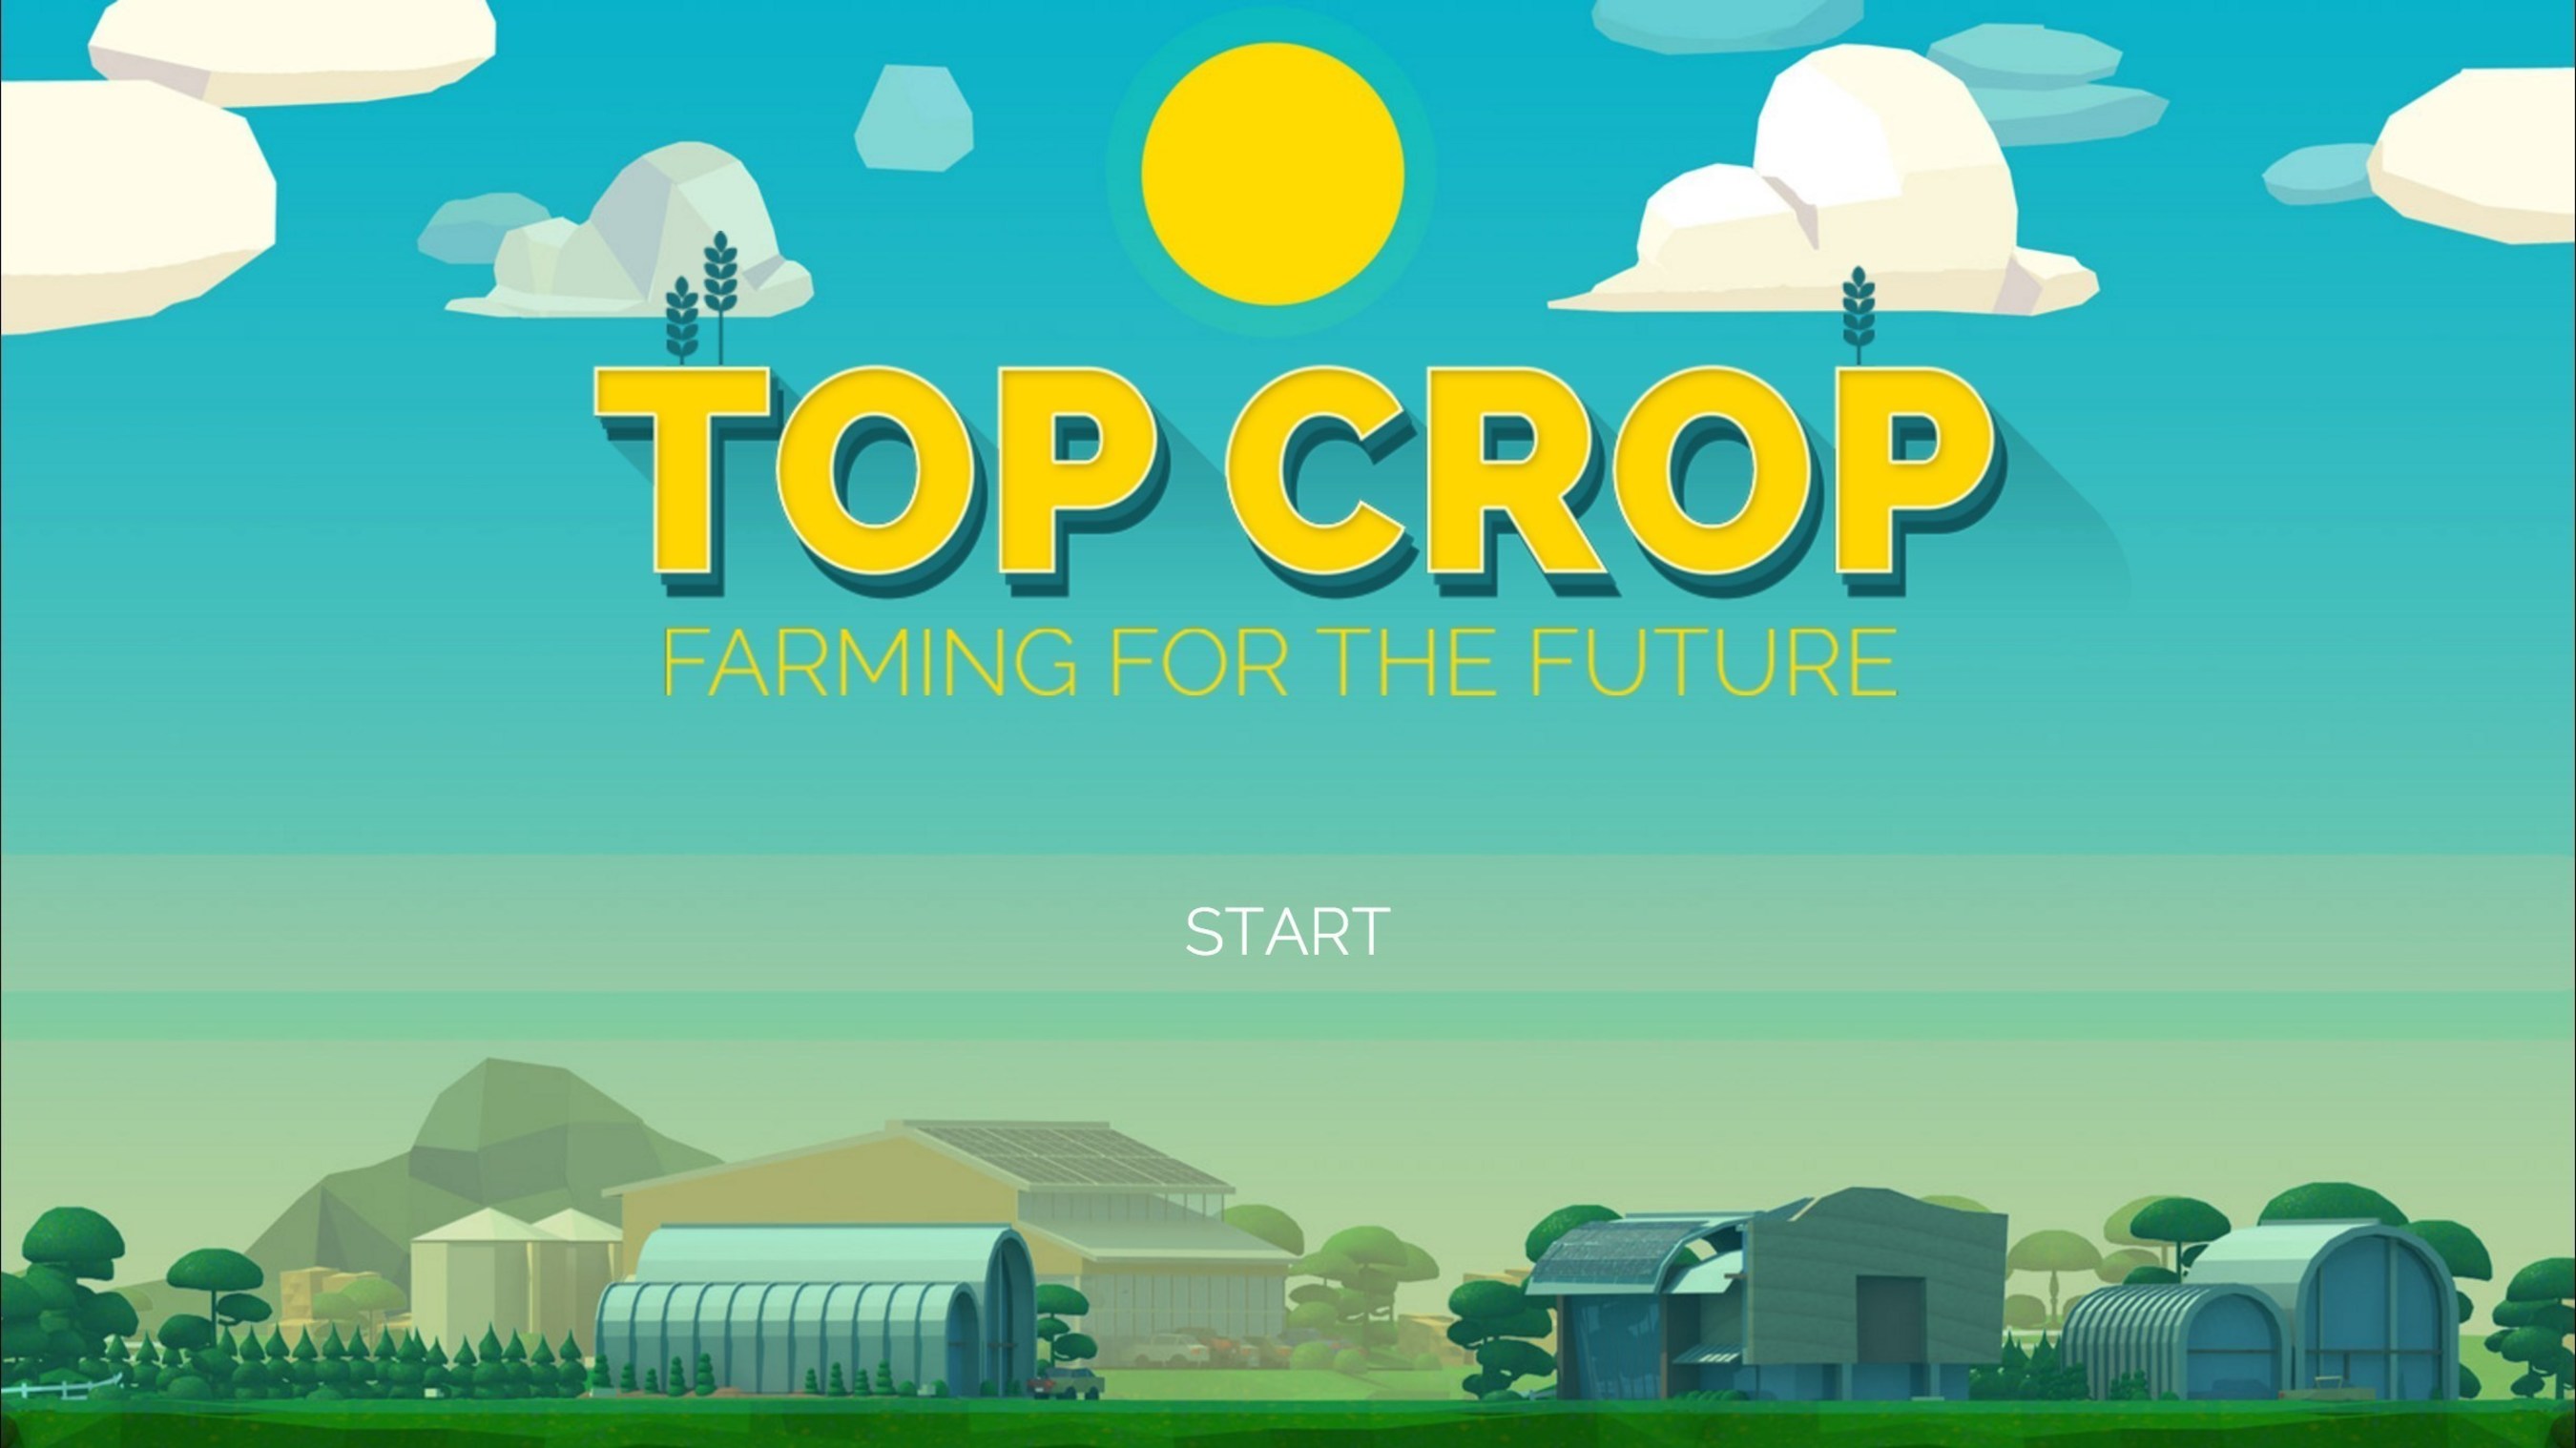 Top Crop: Farming for the Future - an interactive agricultural game from National Geographic and Bayer that will teach students the basics of what it takes to produce crops.